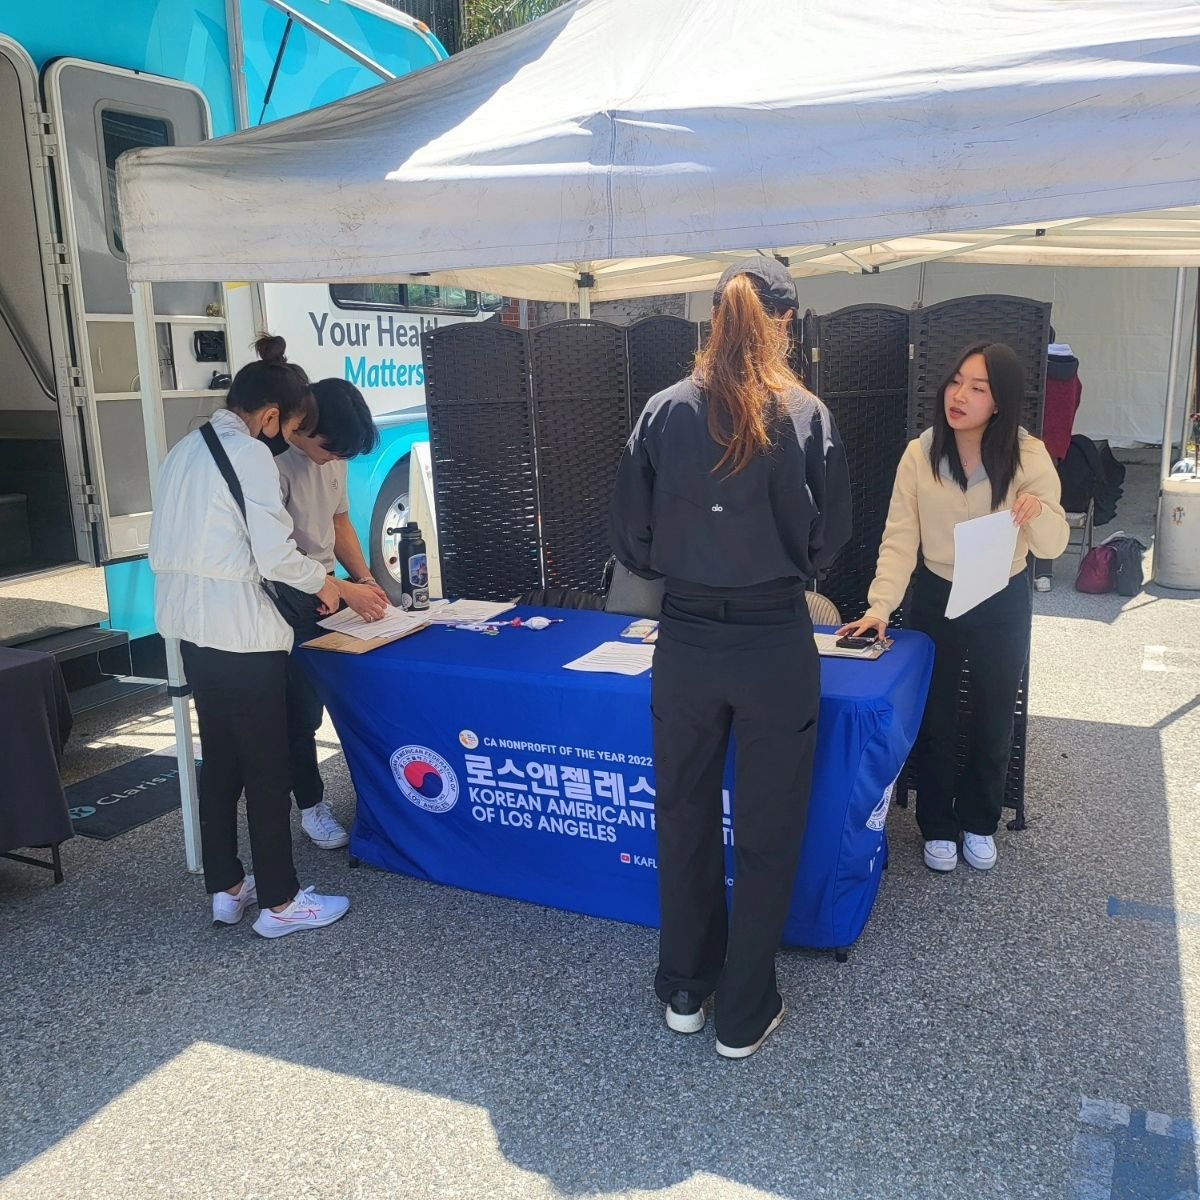 Today, we held our third Woman's Health Event, in which we assisted insured and uninsured members of our community in gaining access to important health screenings. These included breast cancer screening, STD screening, pregnancy testing, and papsmea